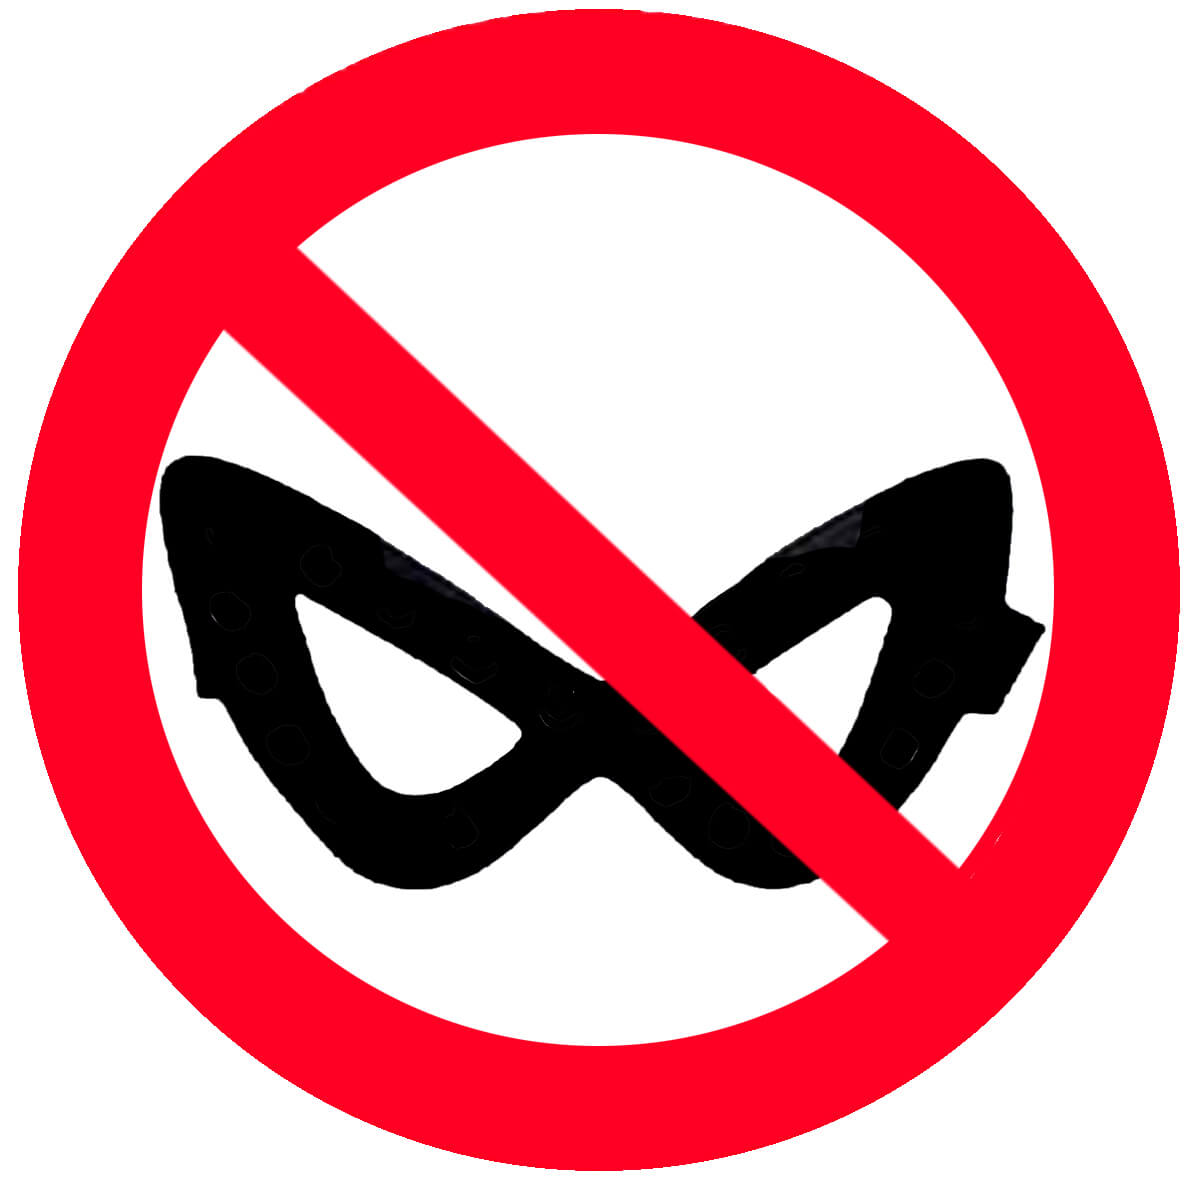 mask with "no" symbol